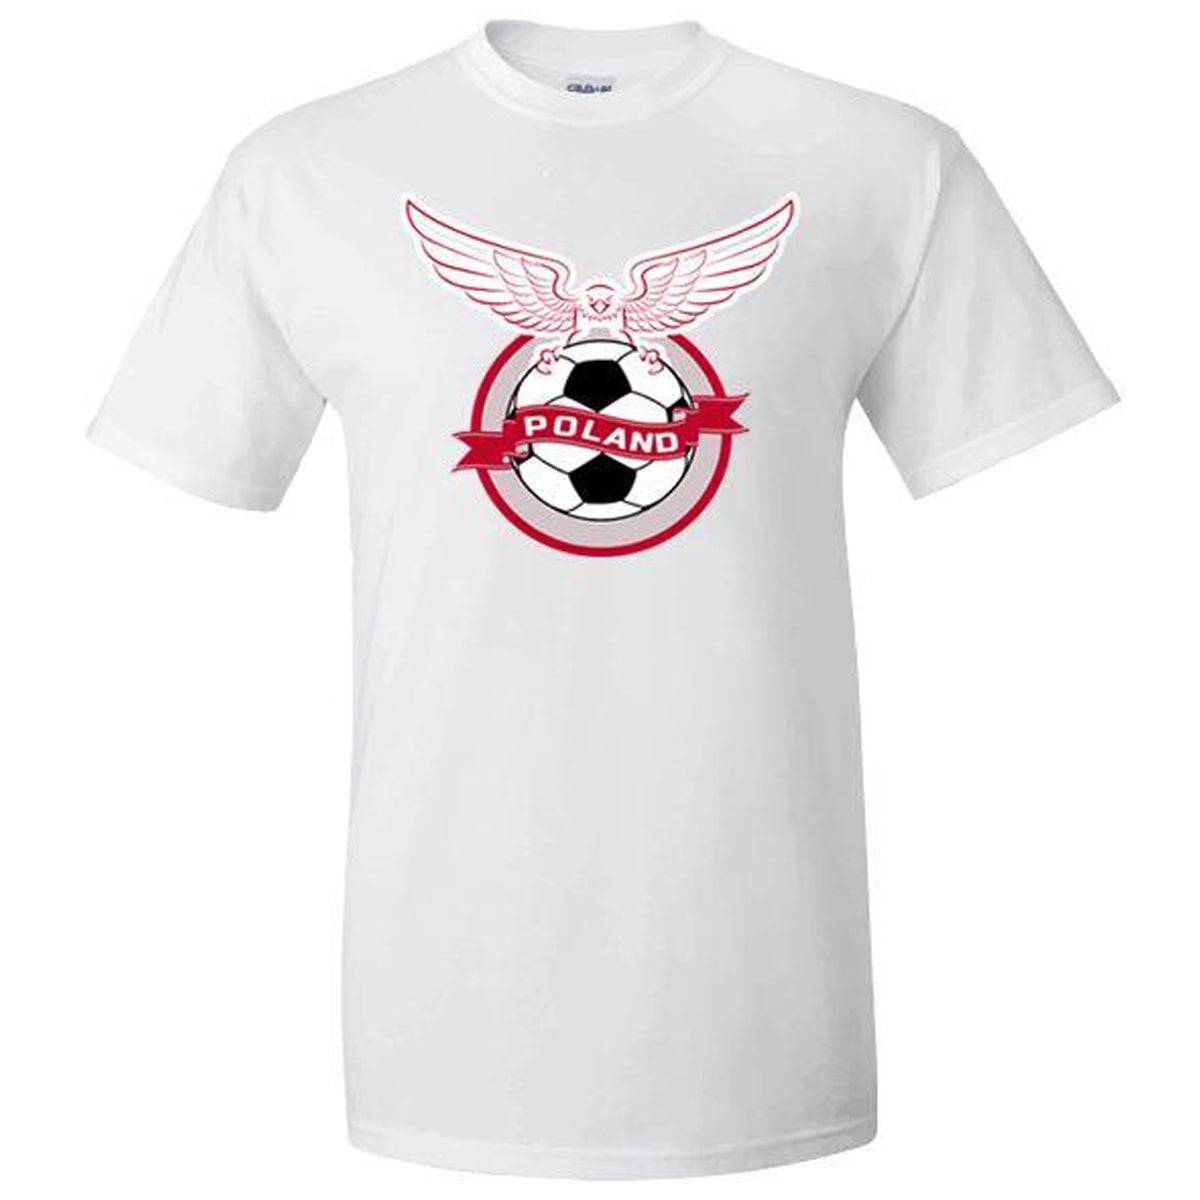 Poland World Cup 2022 Spirit Tee | Various Designs Shirt 411 Wings Youth Medium Youth